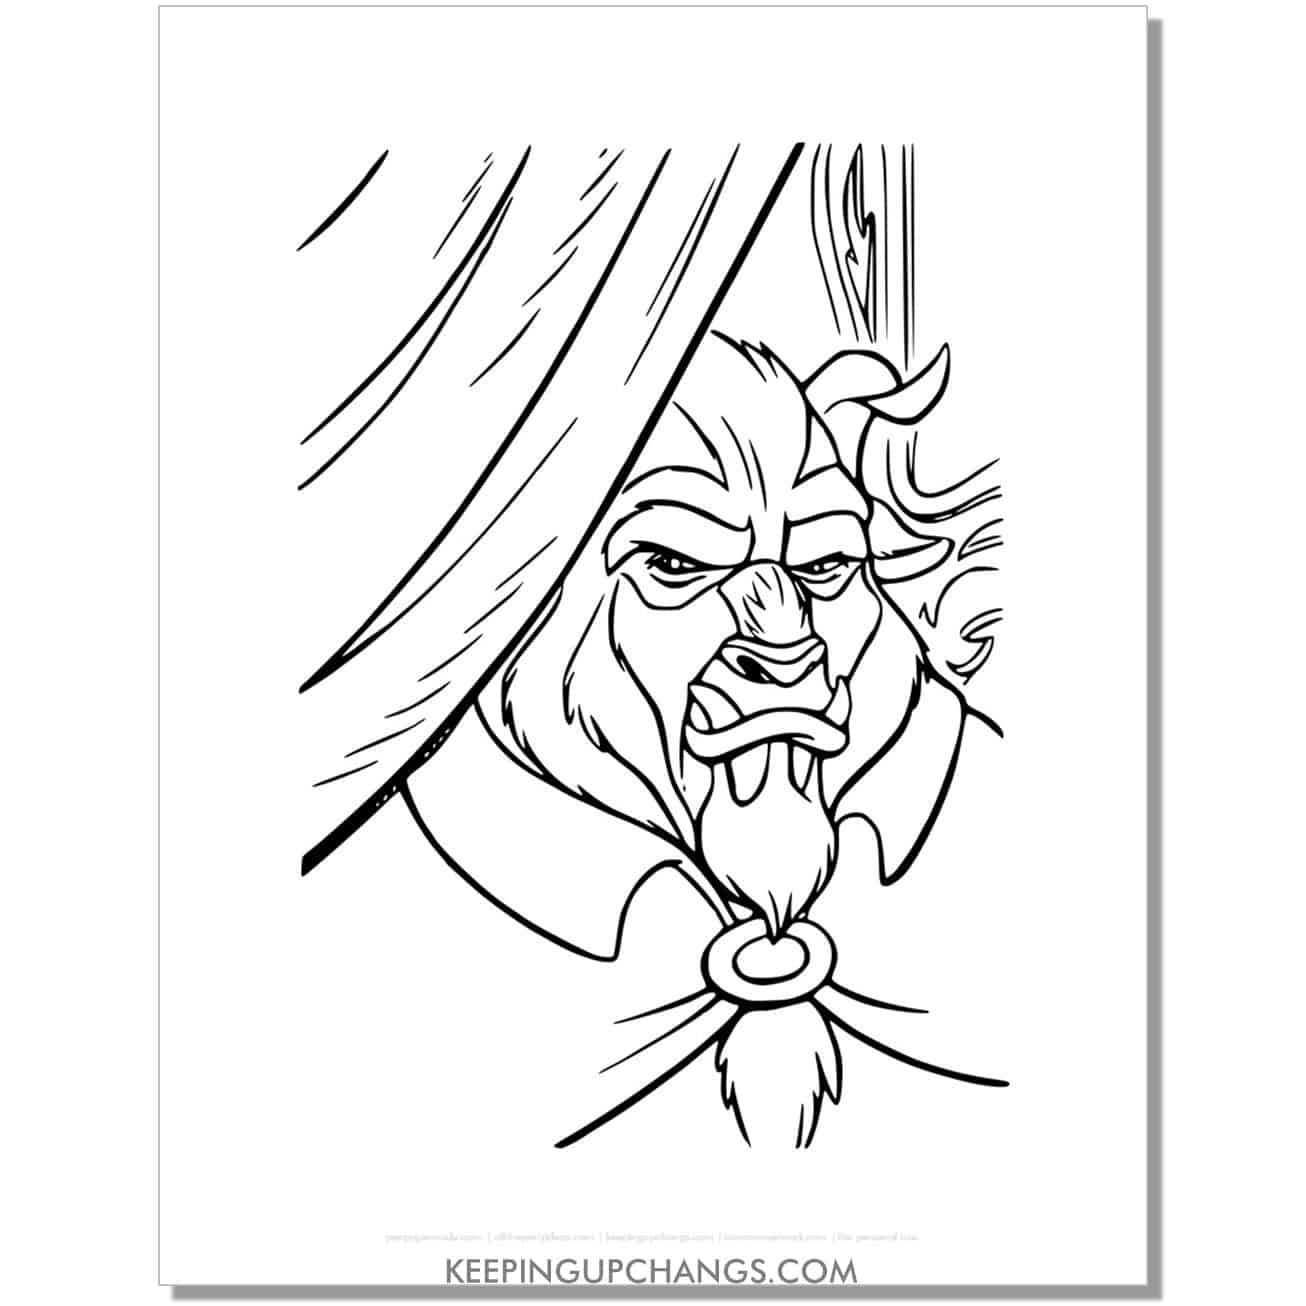 beast not happy coloring page, sheet.